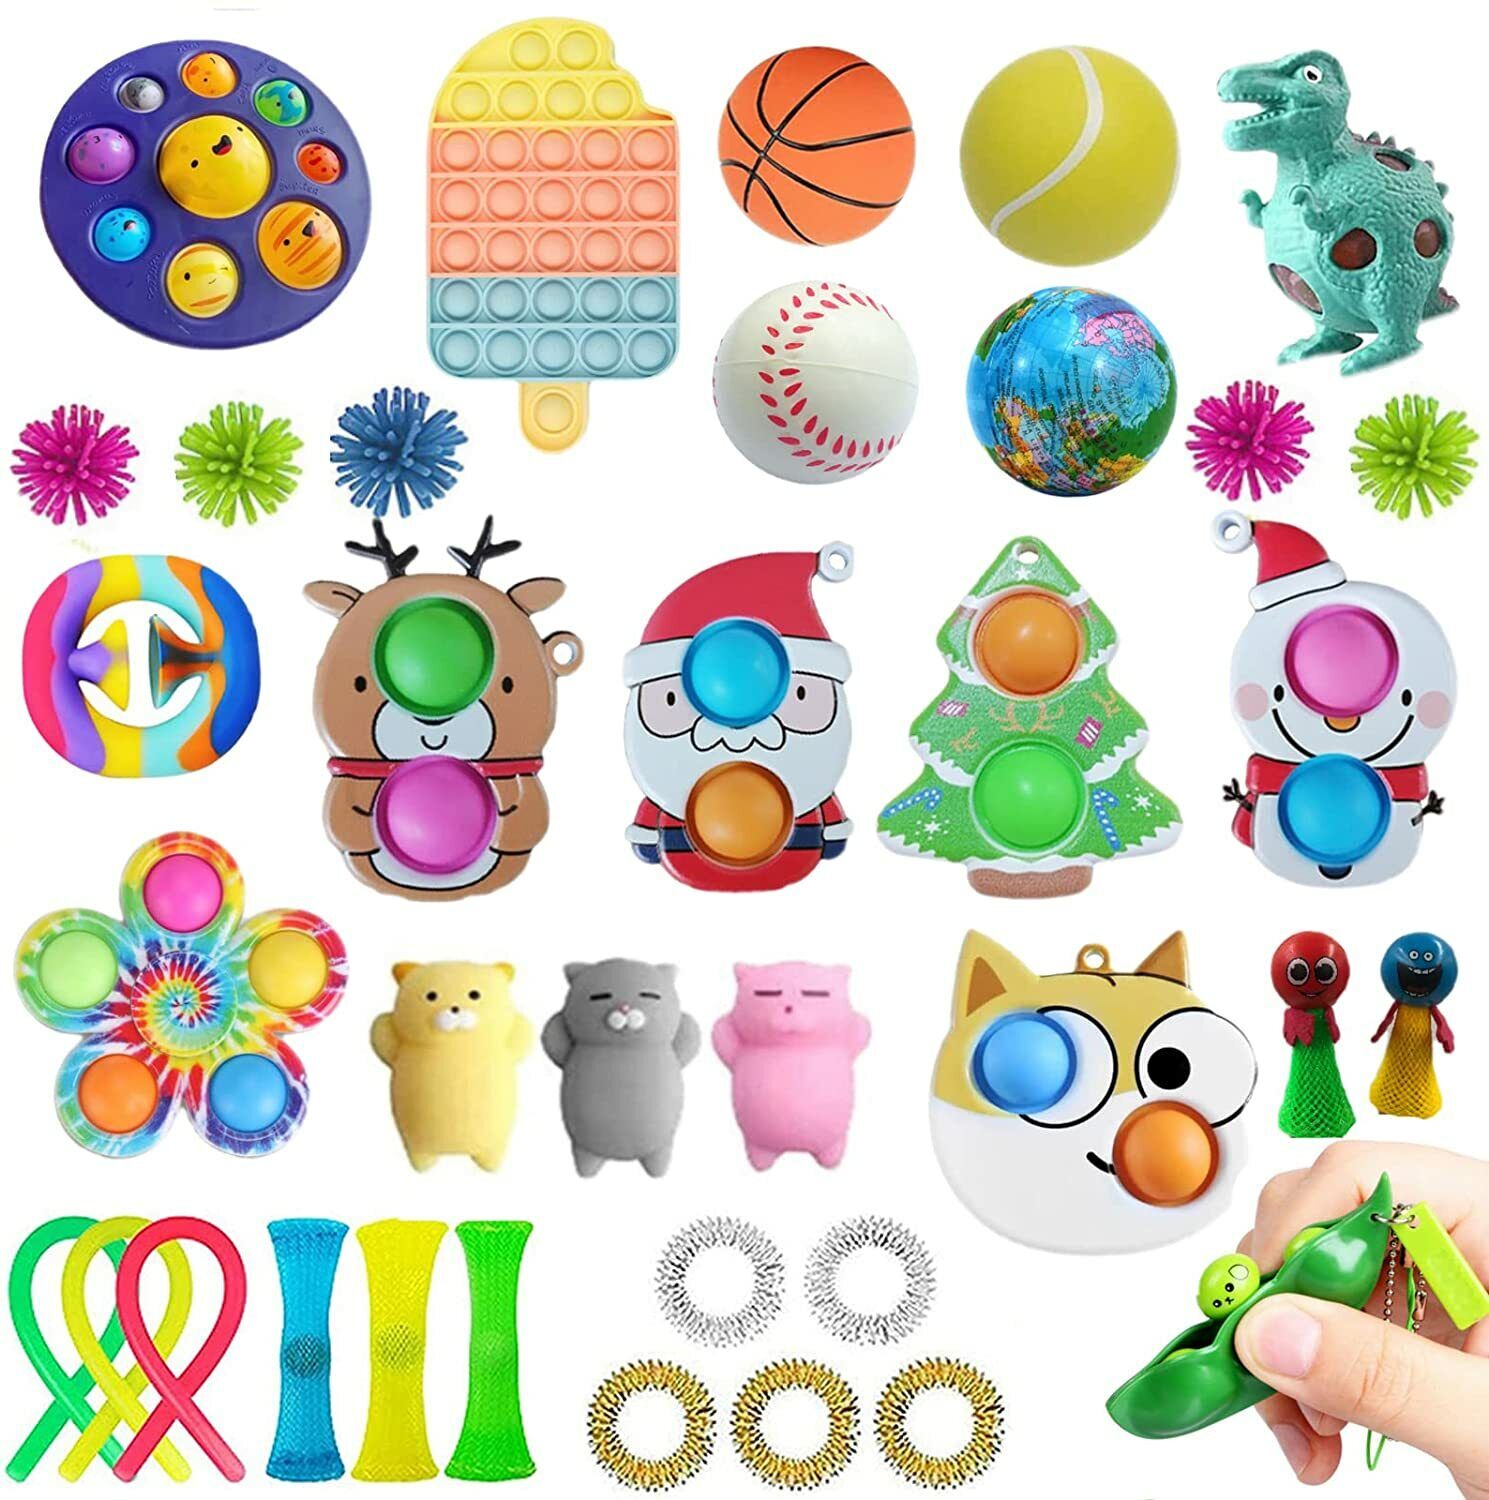 Sensory Fidget Toys Set - 36 Pack - Stress Relief and Anti Anxiety Toys for Kids